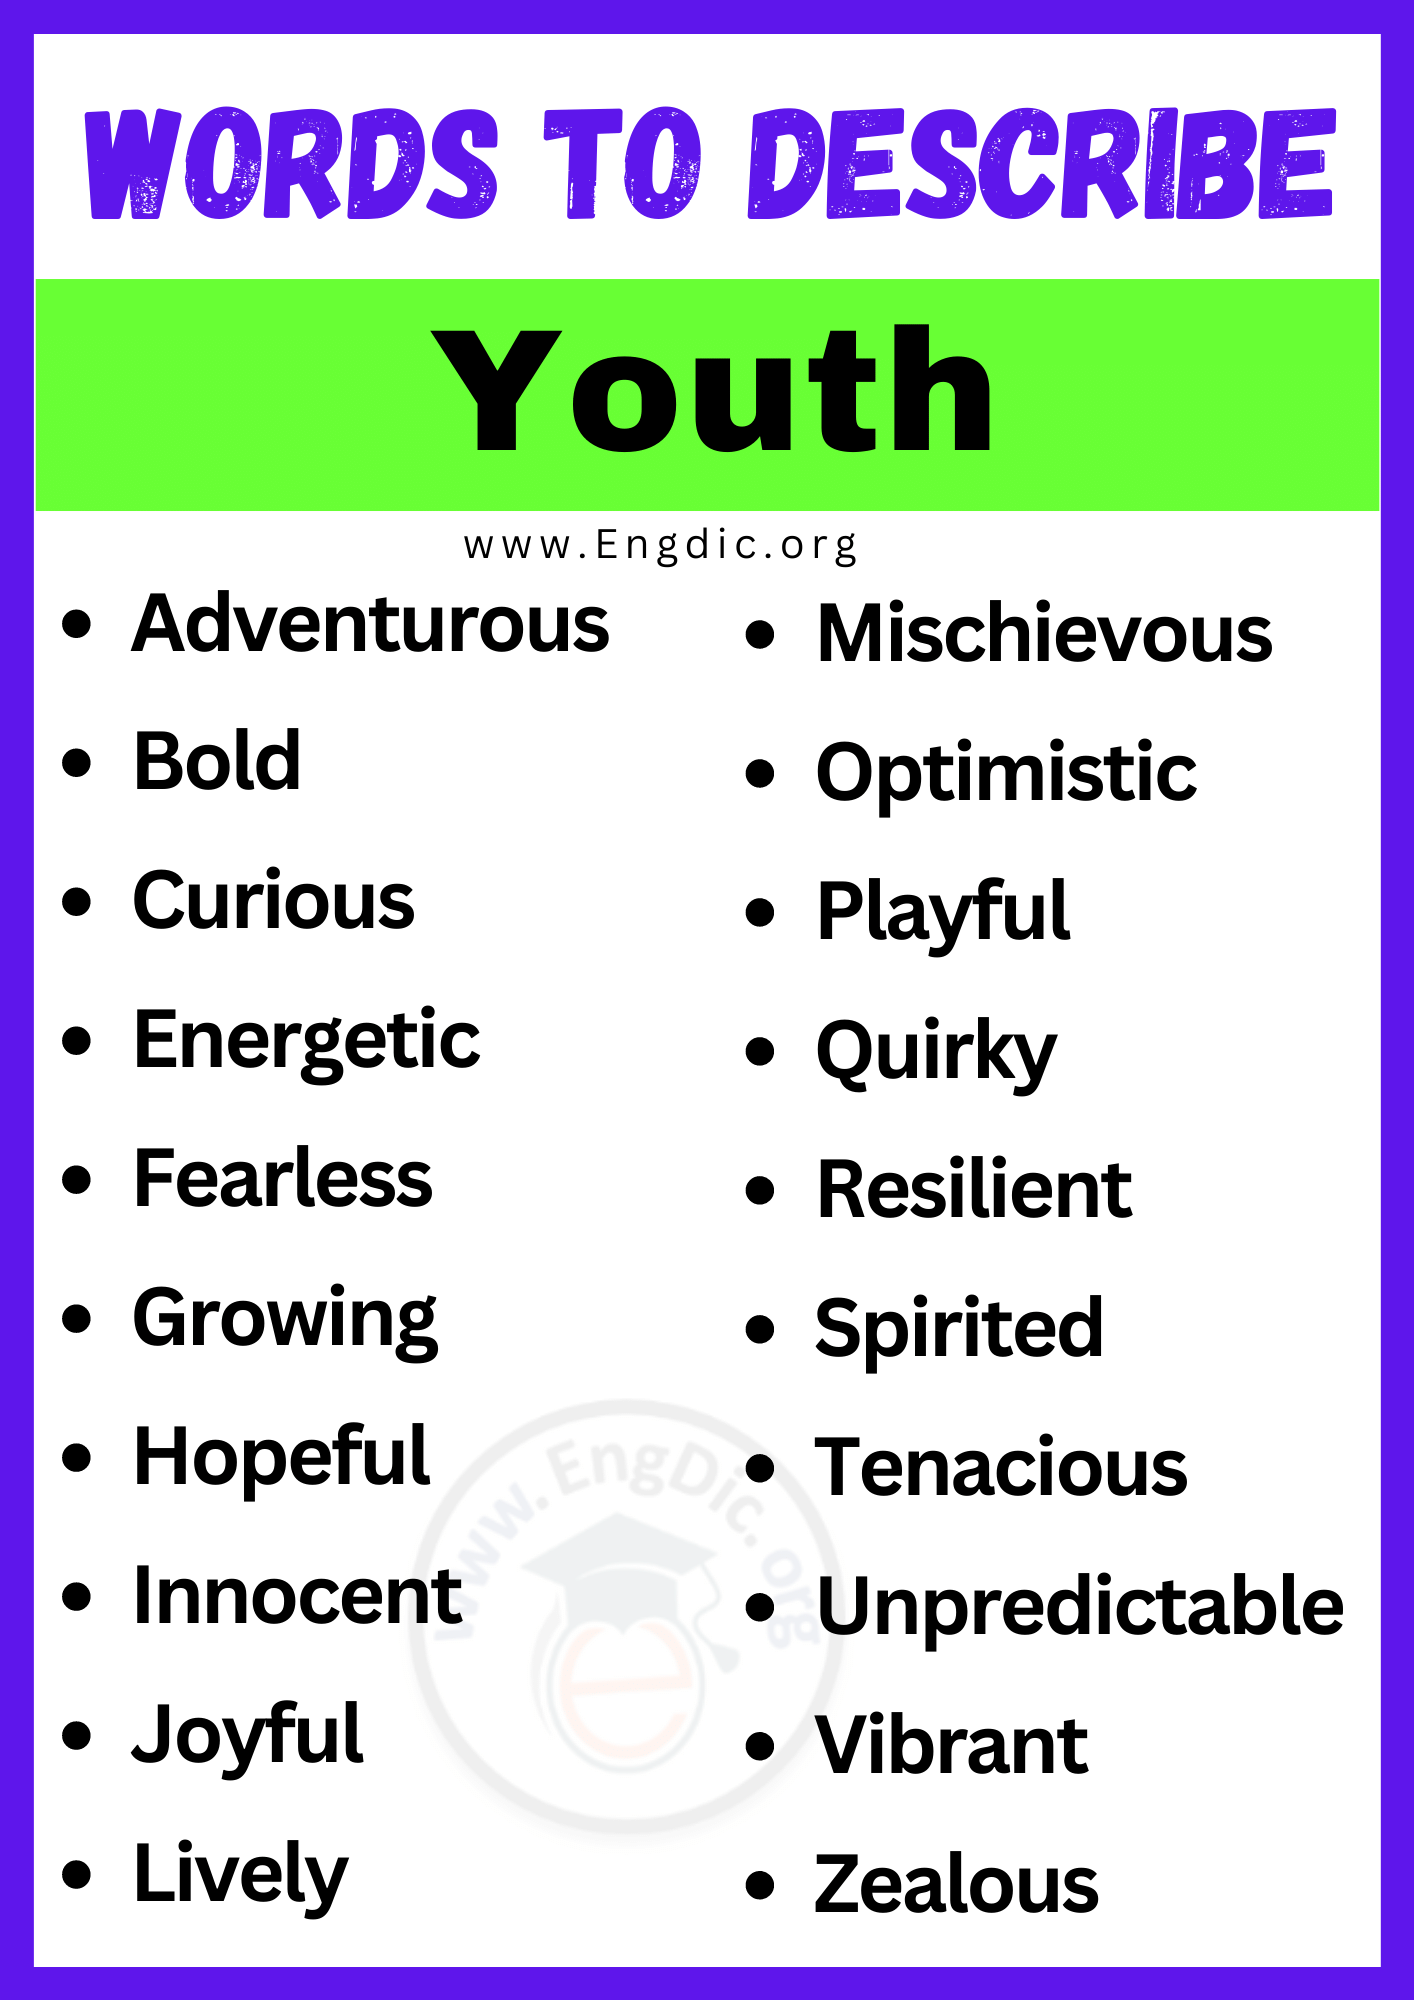 Words to Describe Youth